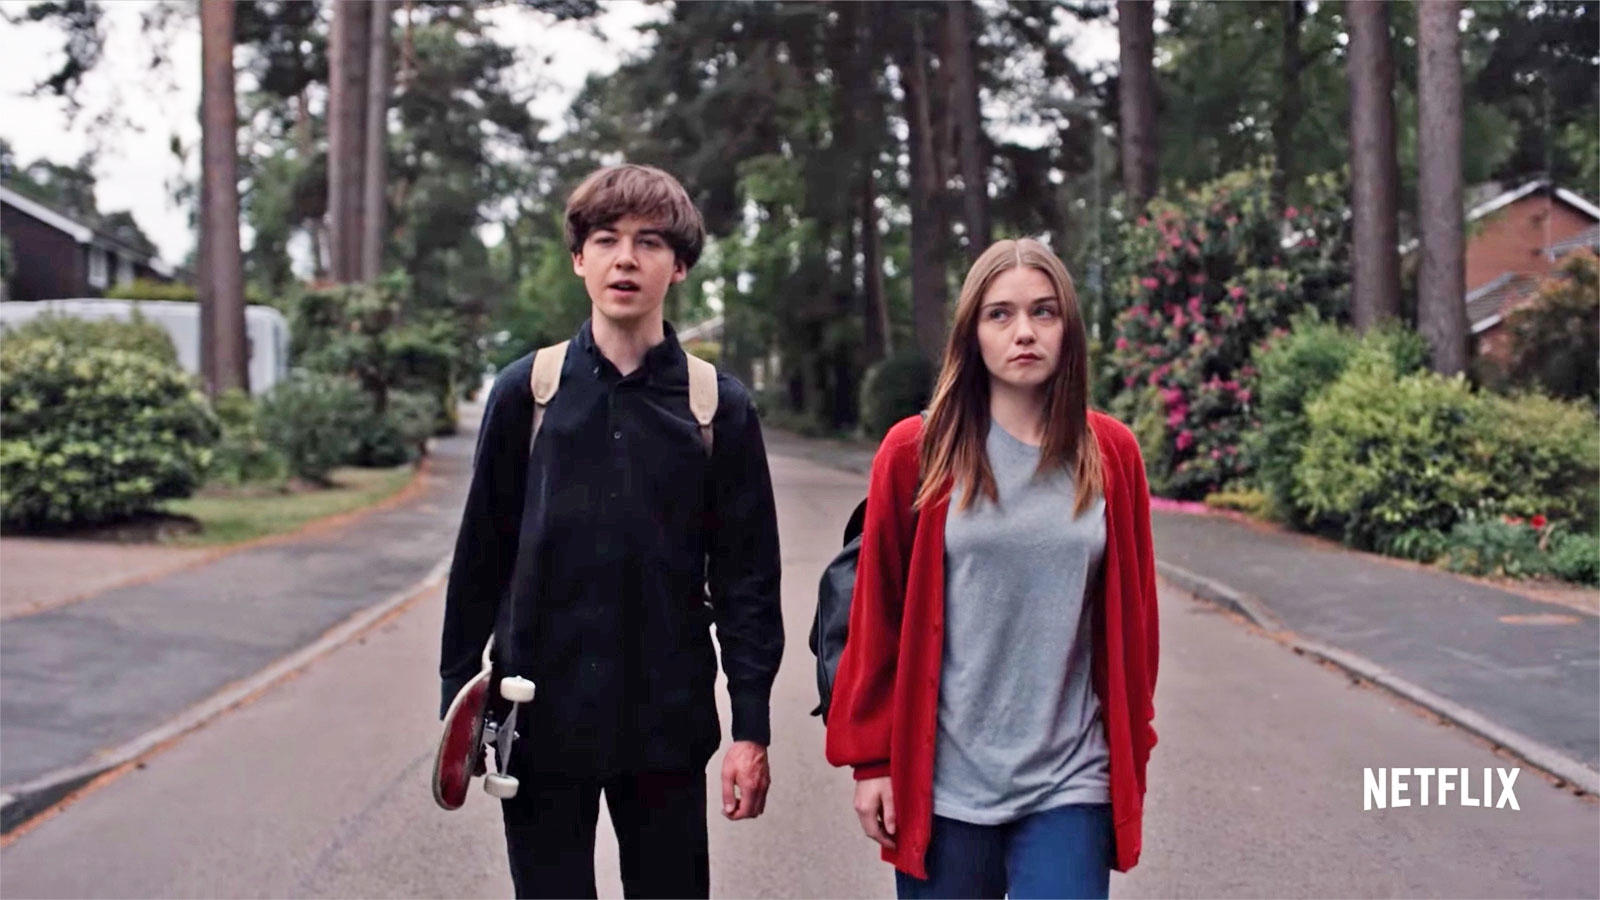 Netflix's take on 'The End of the F***king World' debuts January 5th | DeviceDaily.com